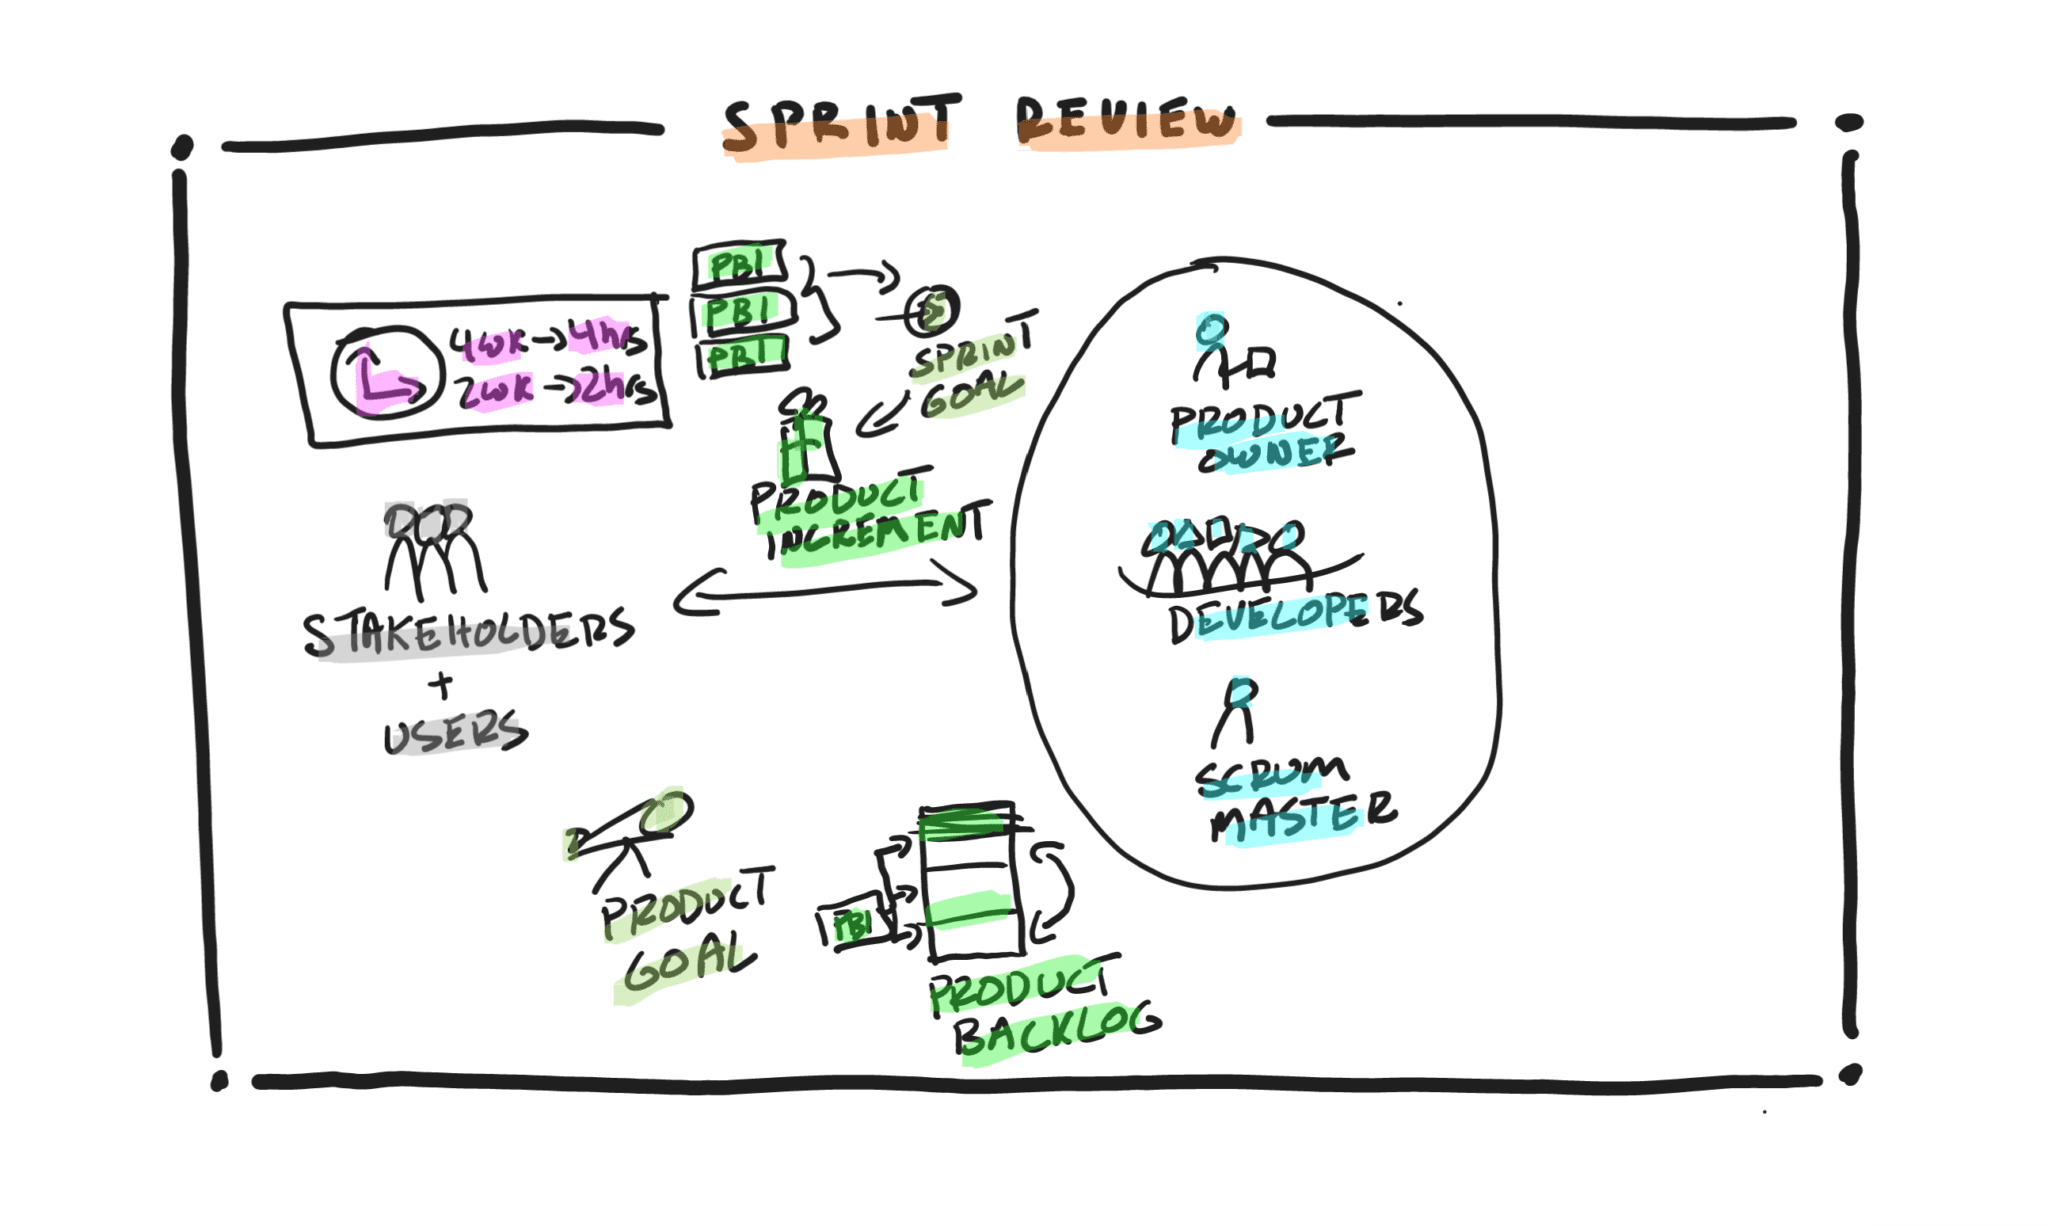 sprint review